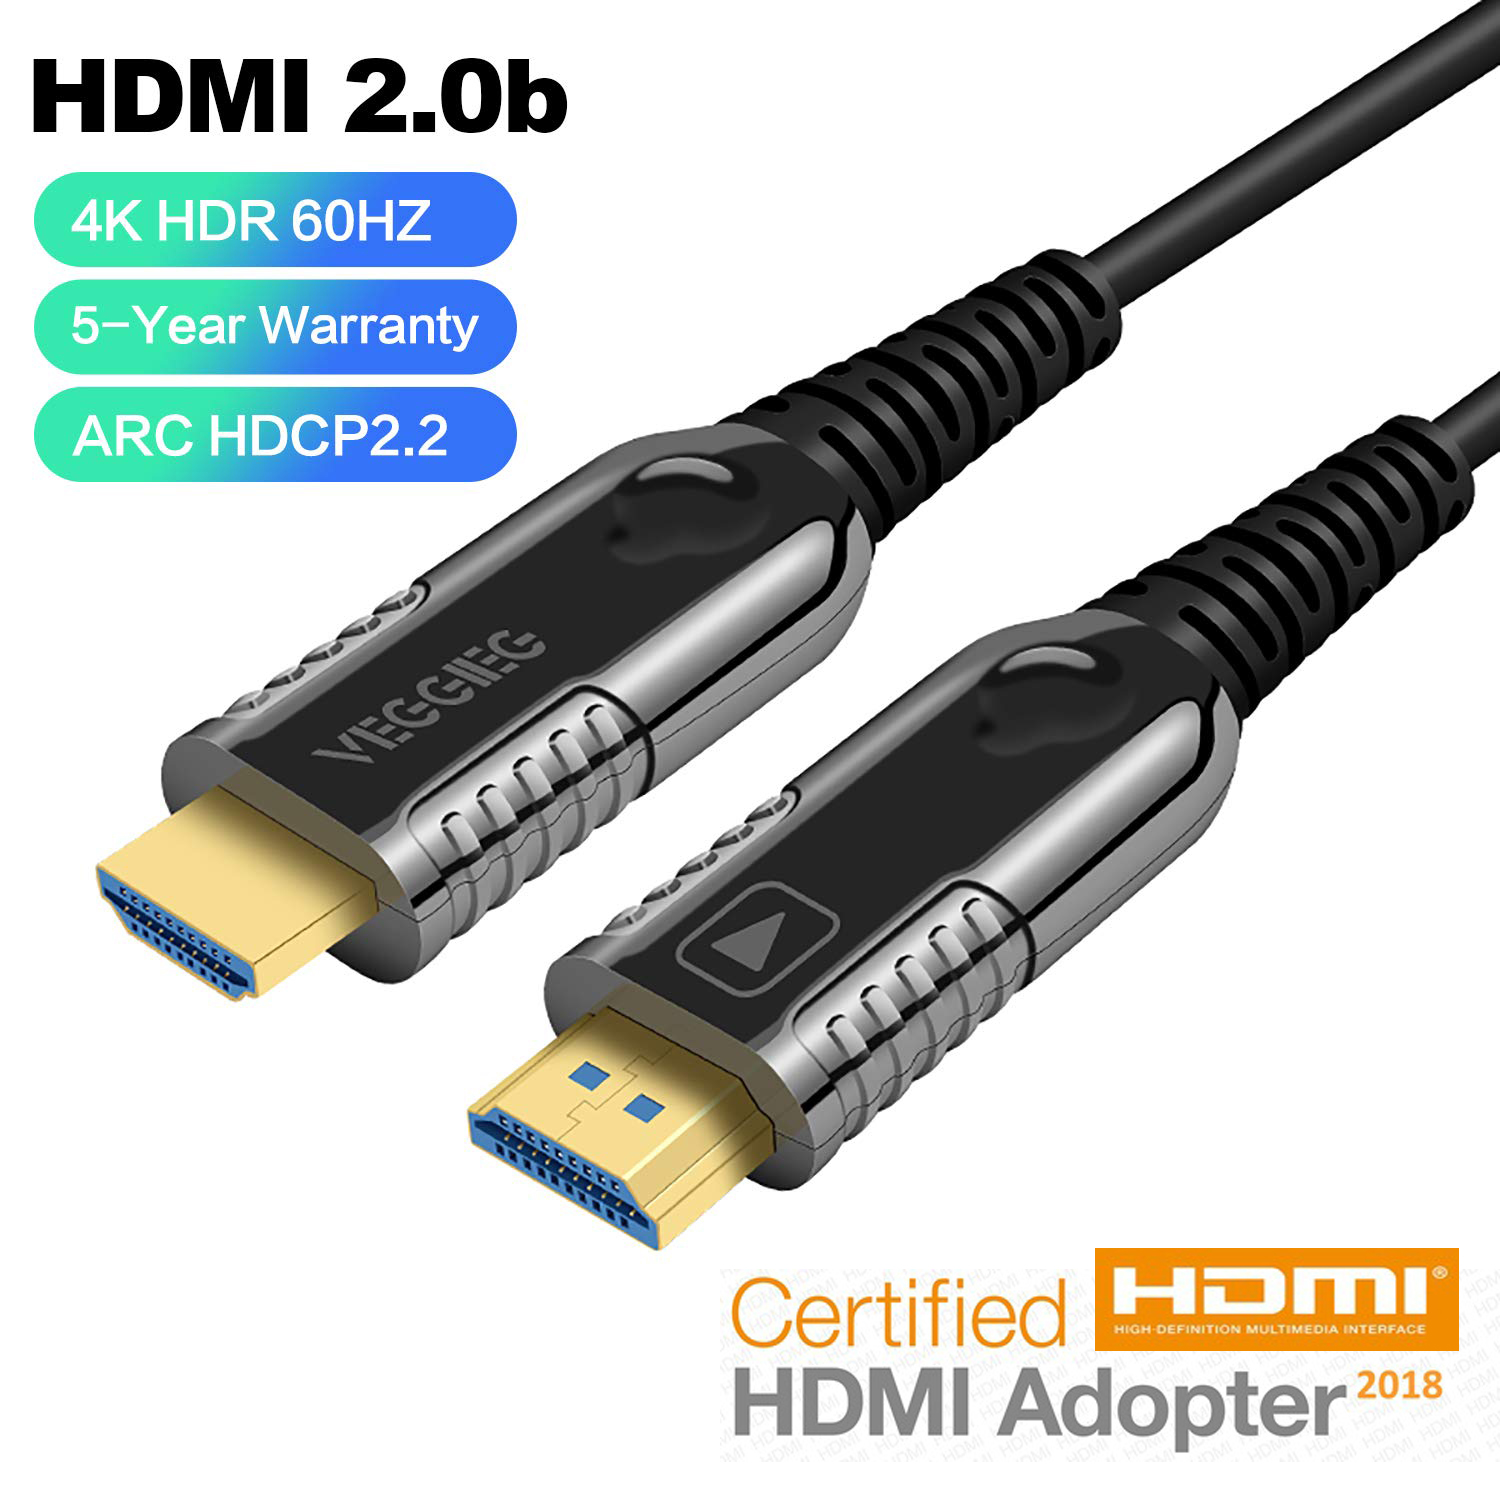 VEGGIEG Fiber Optic HDMI Cable, 4K Optical HDMI Cable 4K@60Hz, 4:4:4 HDR, Dolby Vision, HDCP2.2, 3D, High 18Gbps fits Long Distance Transmission (50M,160ft) HDMI Cables - Newegg.com